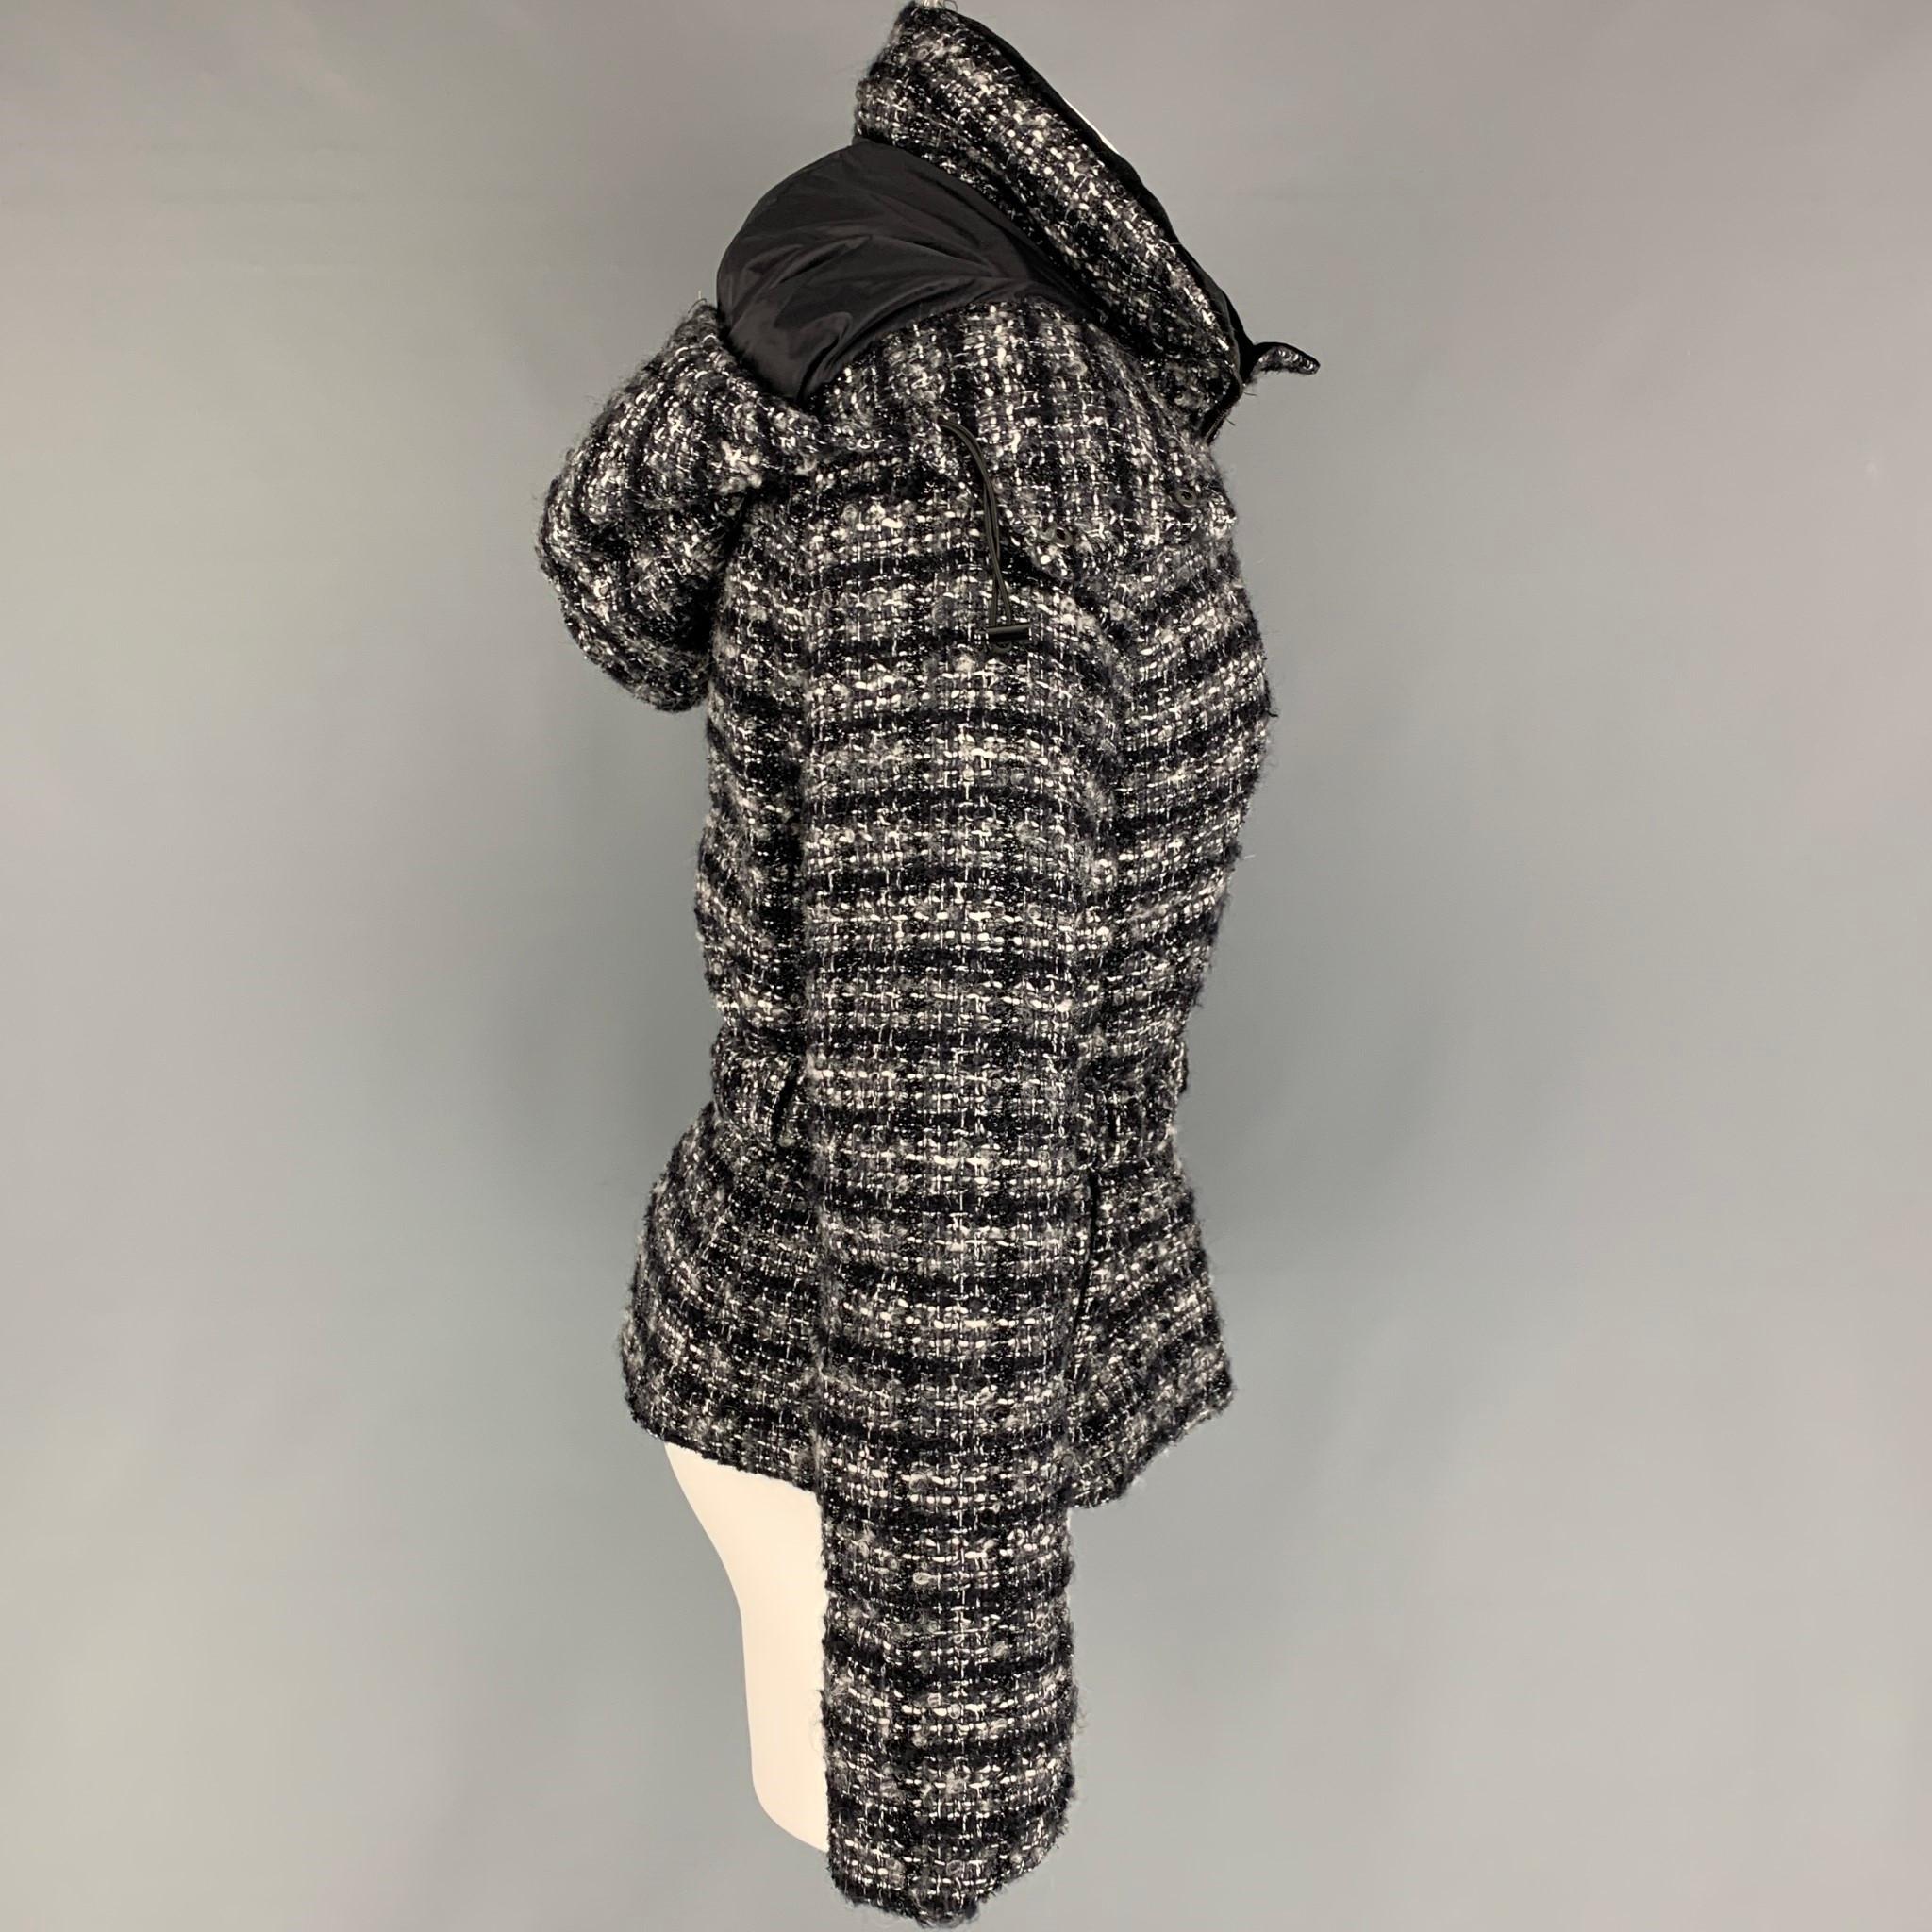 EMPORIO ARMANI jacket comes in a black & white woven wool featuring a hooded detail, belted, high collar, and a zip up closure. 

Very Good Pre-Owned Condition.
Marked: 40

Measurements:

Shoulder: 16 in.
Bust: 36 in.
Sleeve: 24.5 in.
Length: 22.5